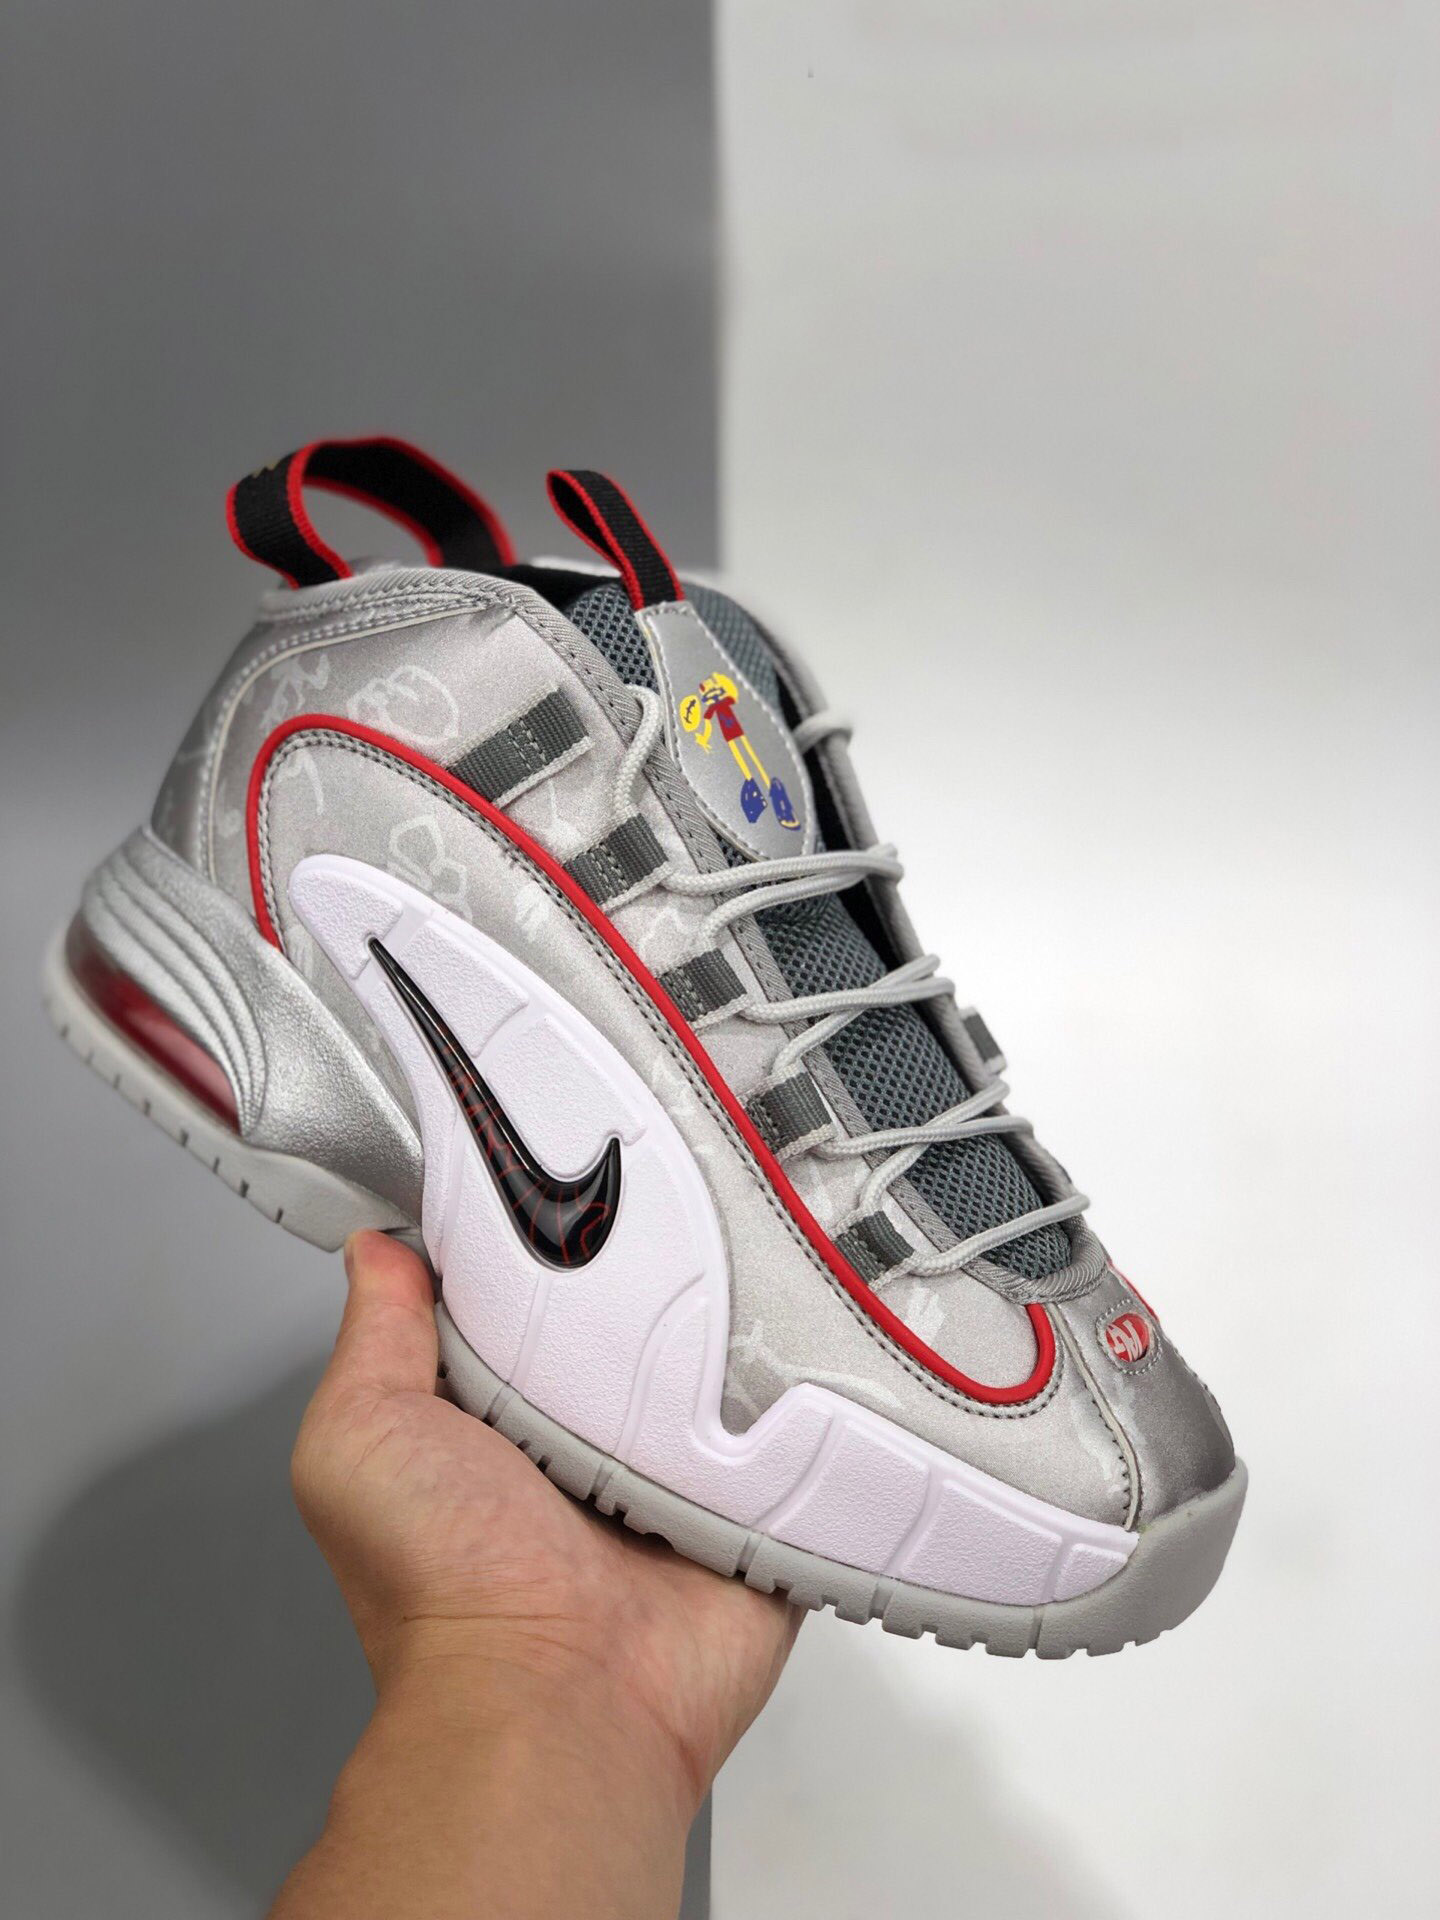 Nike Air Max Penny DB 'Doernbecher'  For Sale – Sneaker